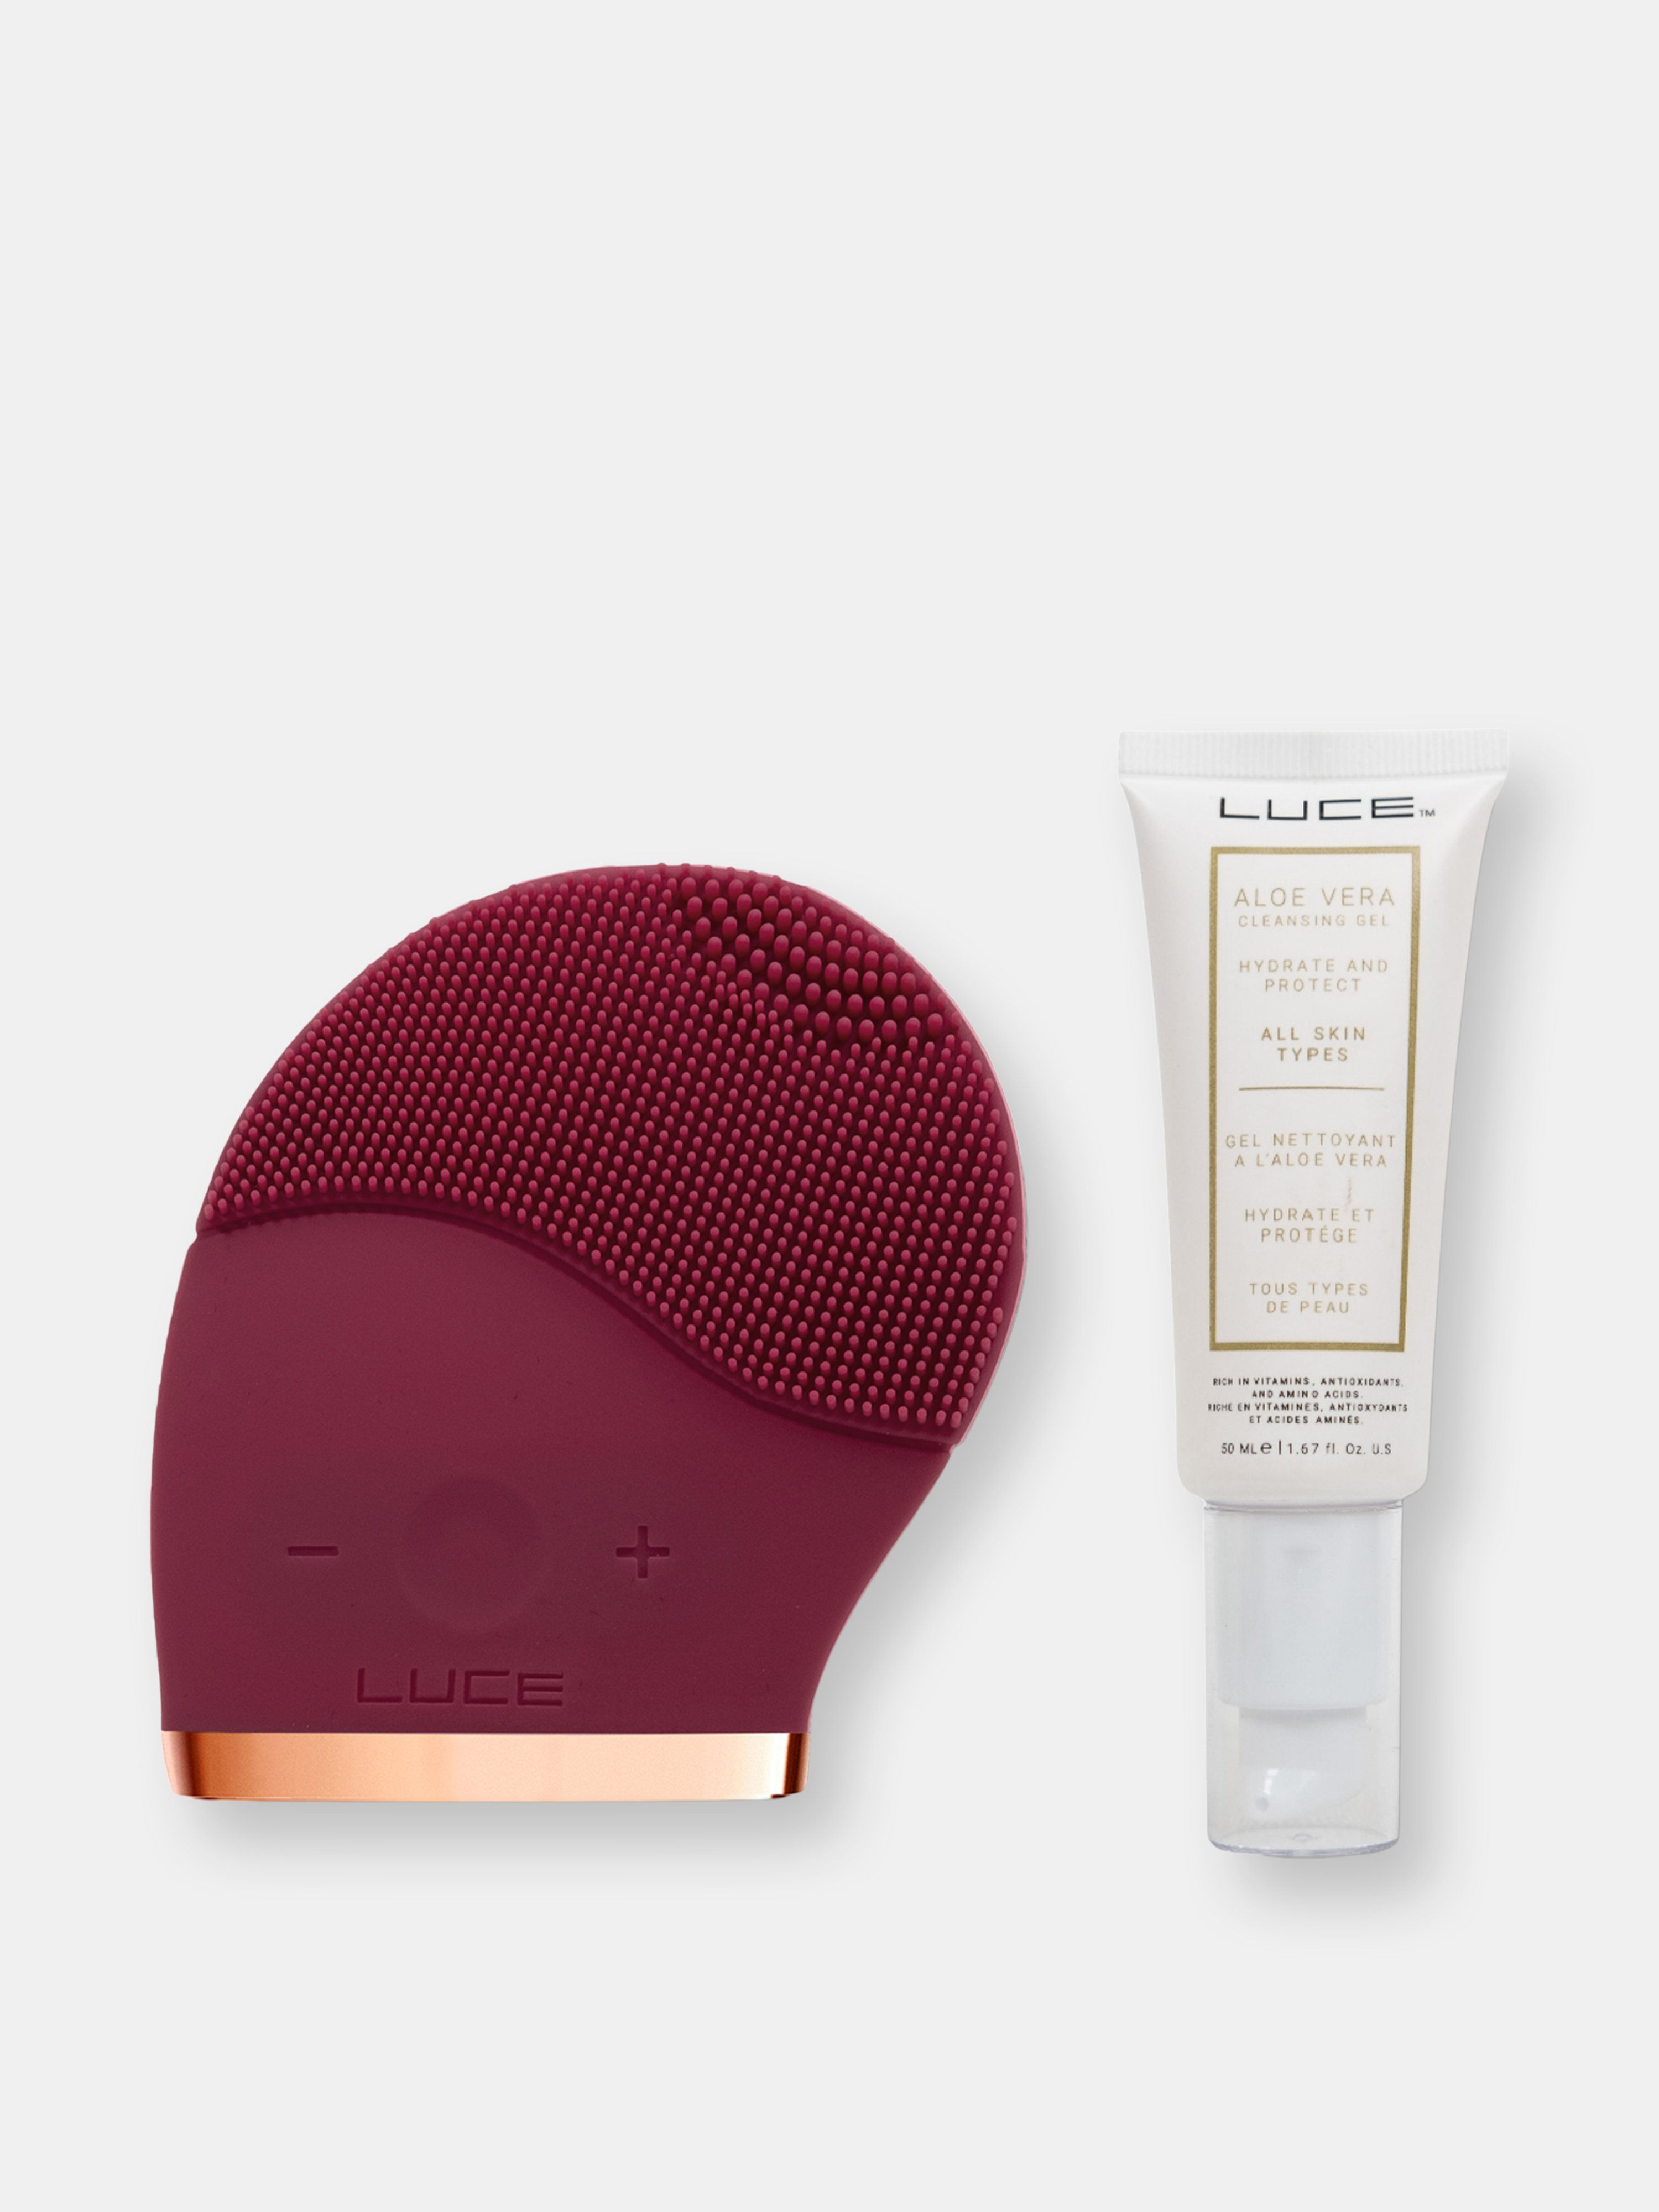 Luce Beauty Luce Facial Cleansing Brush & Aloe Vera Gel Face Wash In Brown